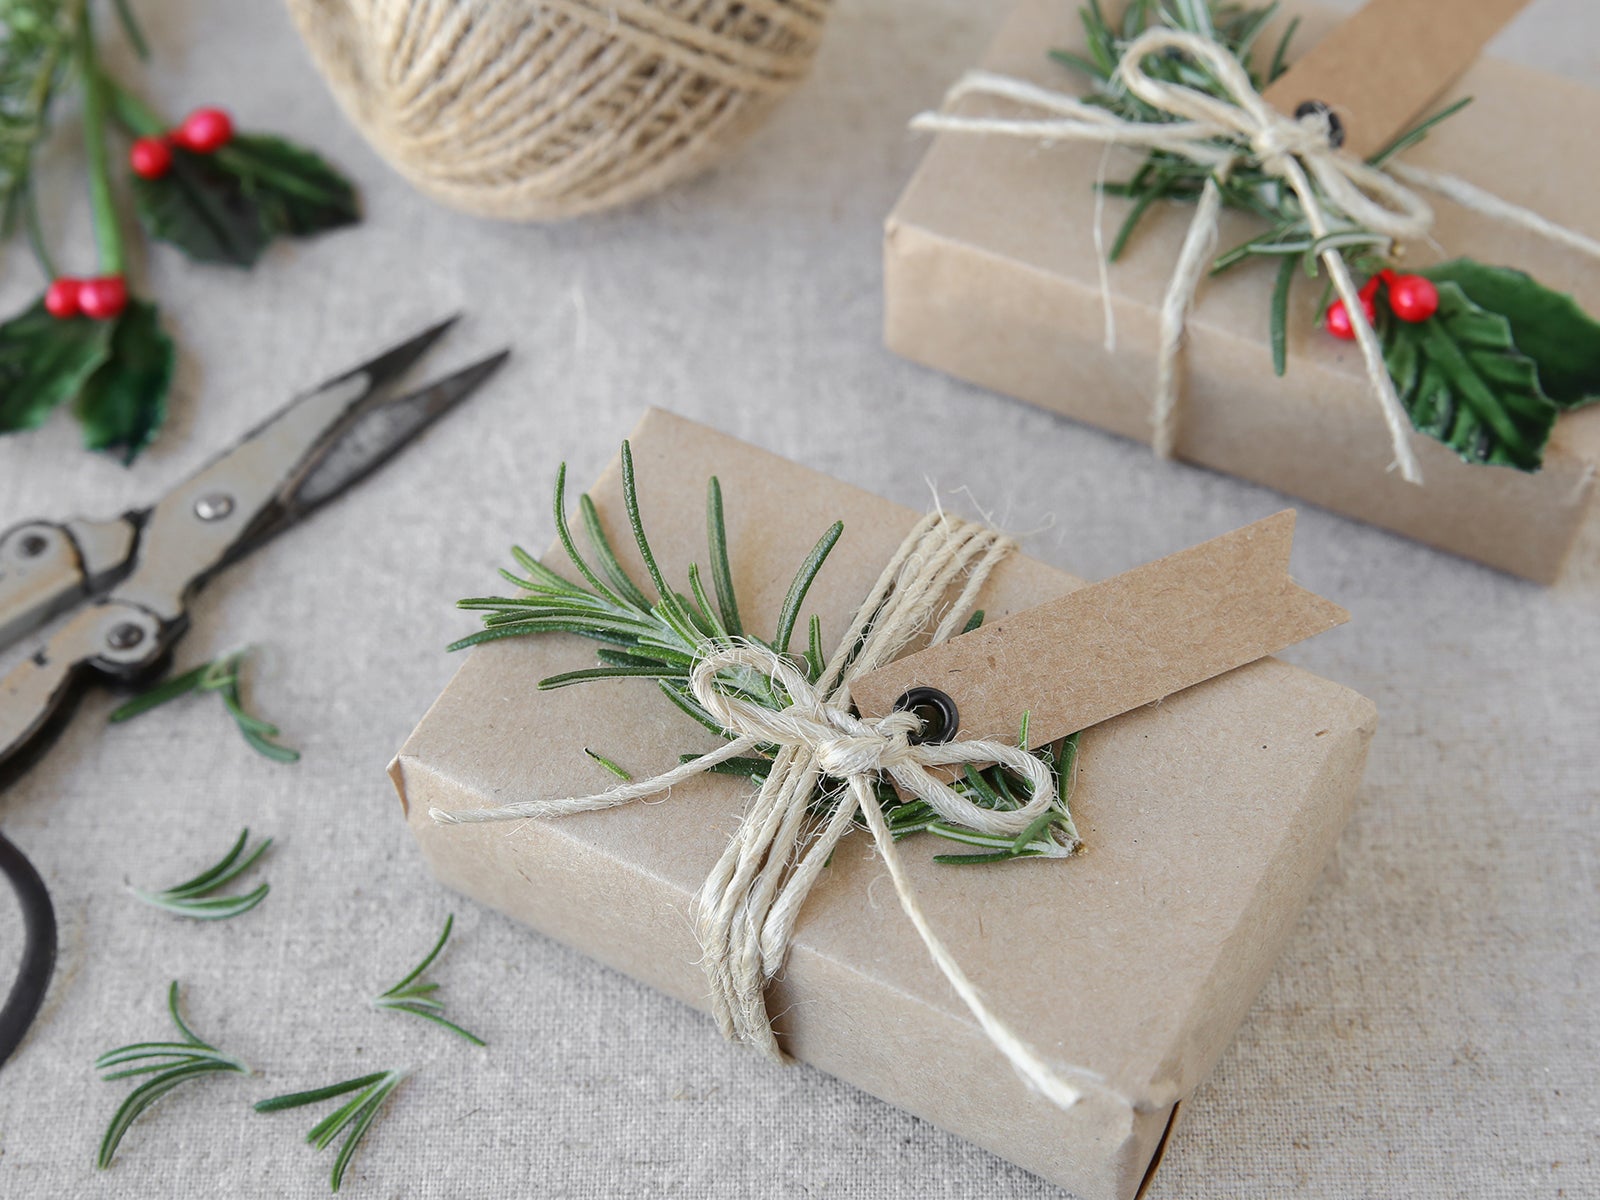 Eco craft Christmas gift boxes wrapped in string and trimmed with rosemary